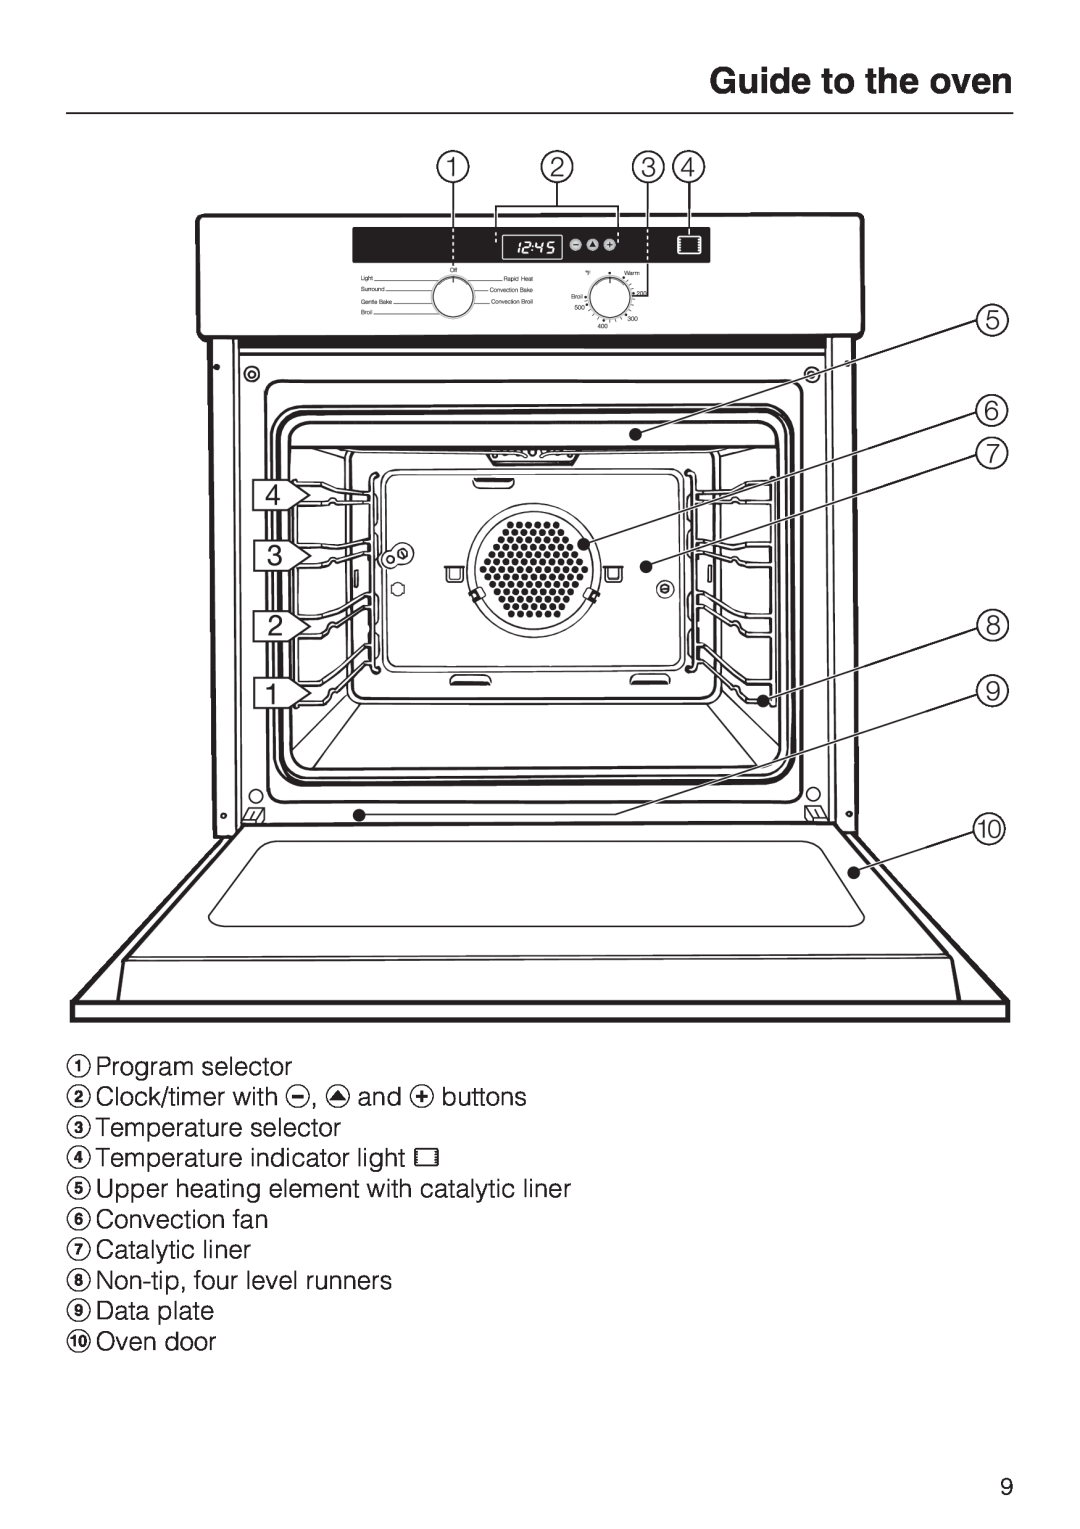 Miele H 4242 B Guide to the oven, Program selector Clock/timer with , and buttons, Convection fan Catalytic liner 